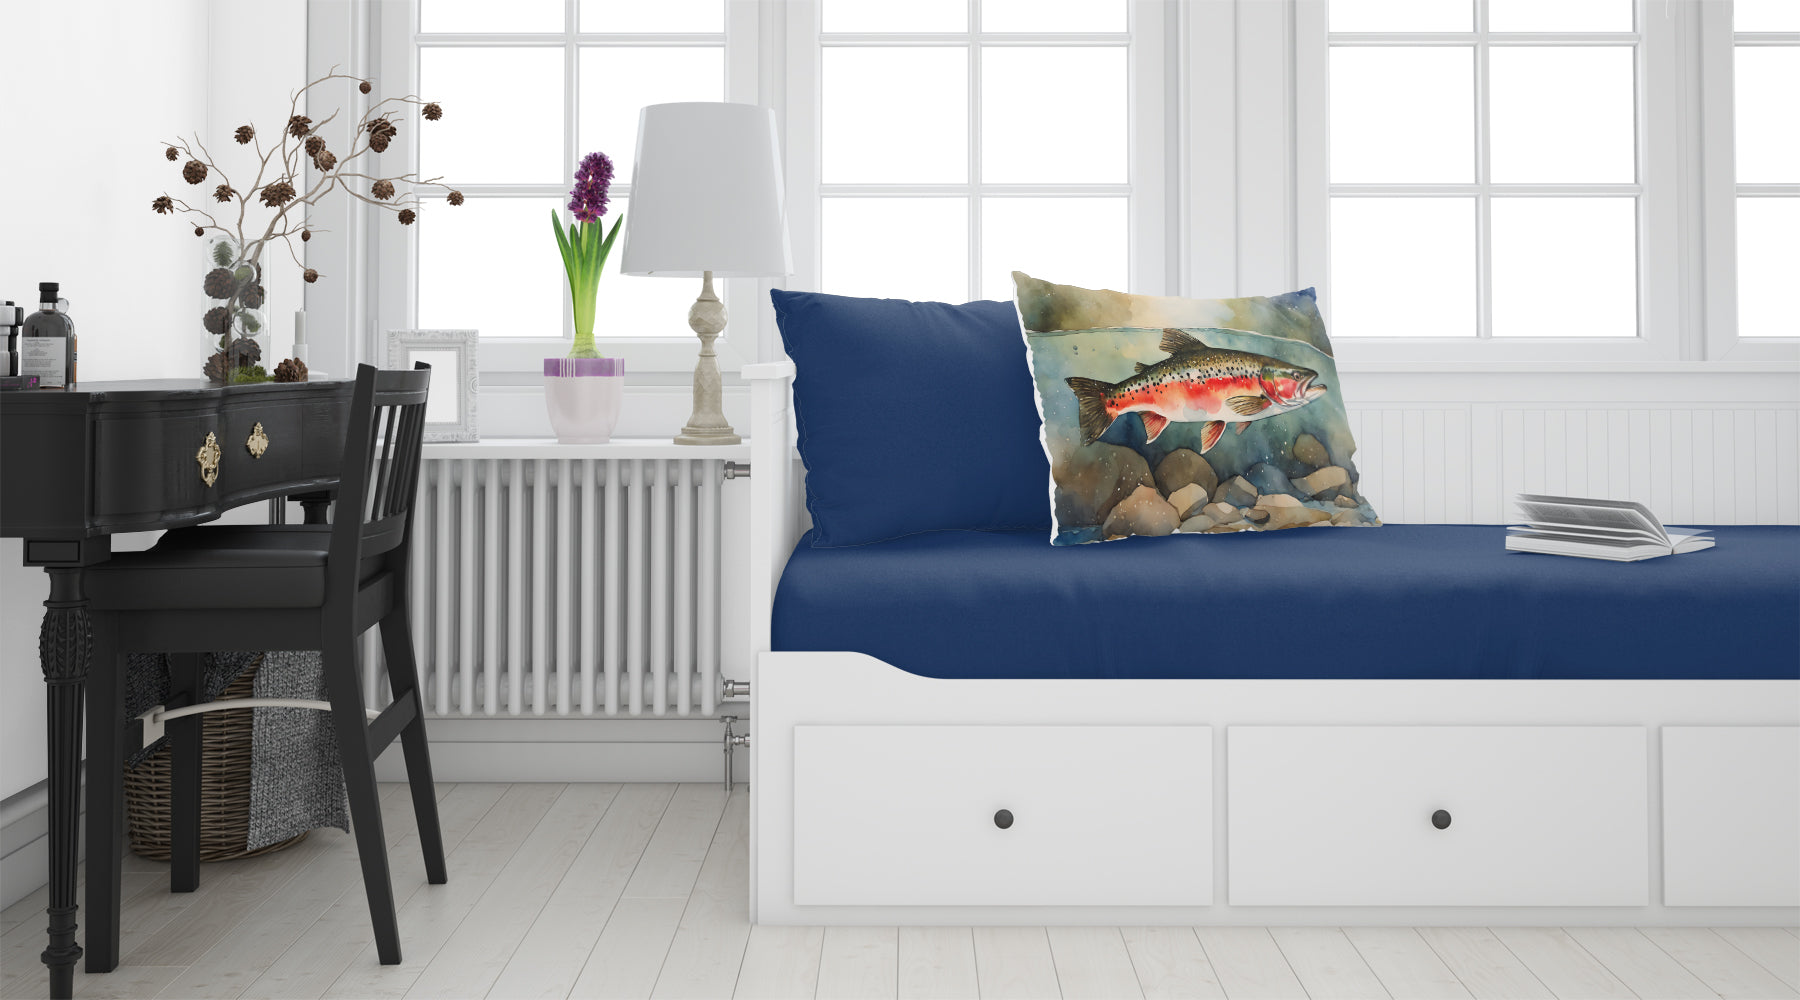 Buy this Trout Standard Pillowcase